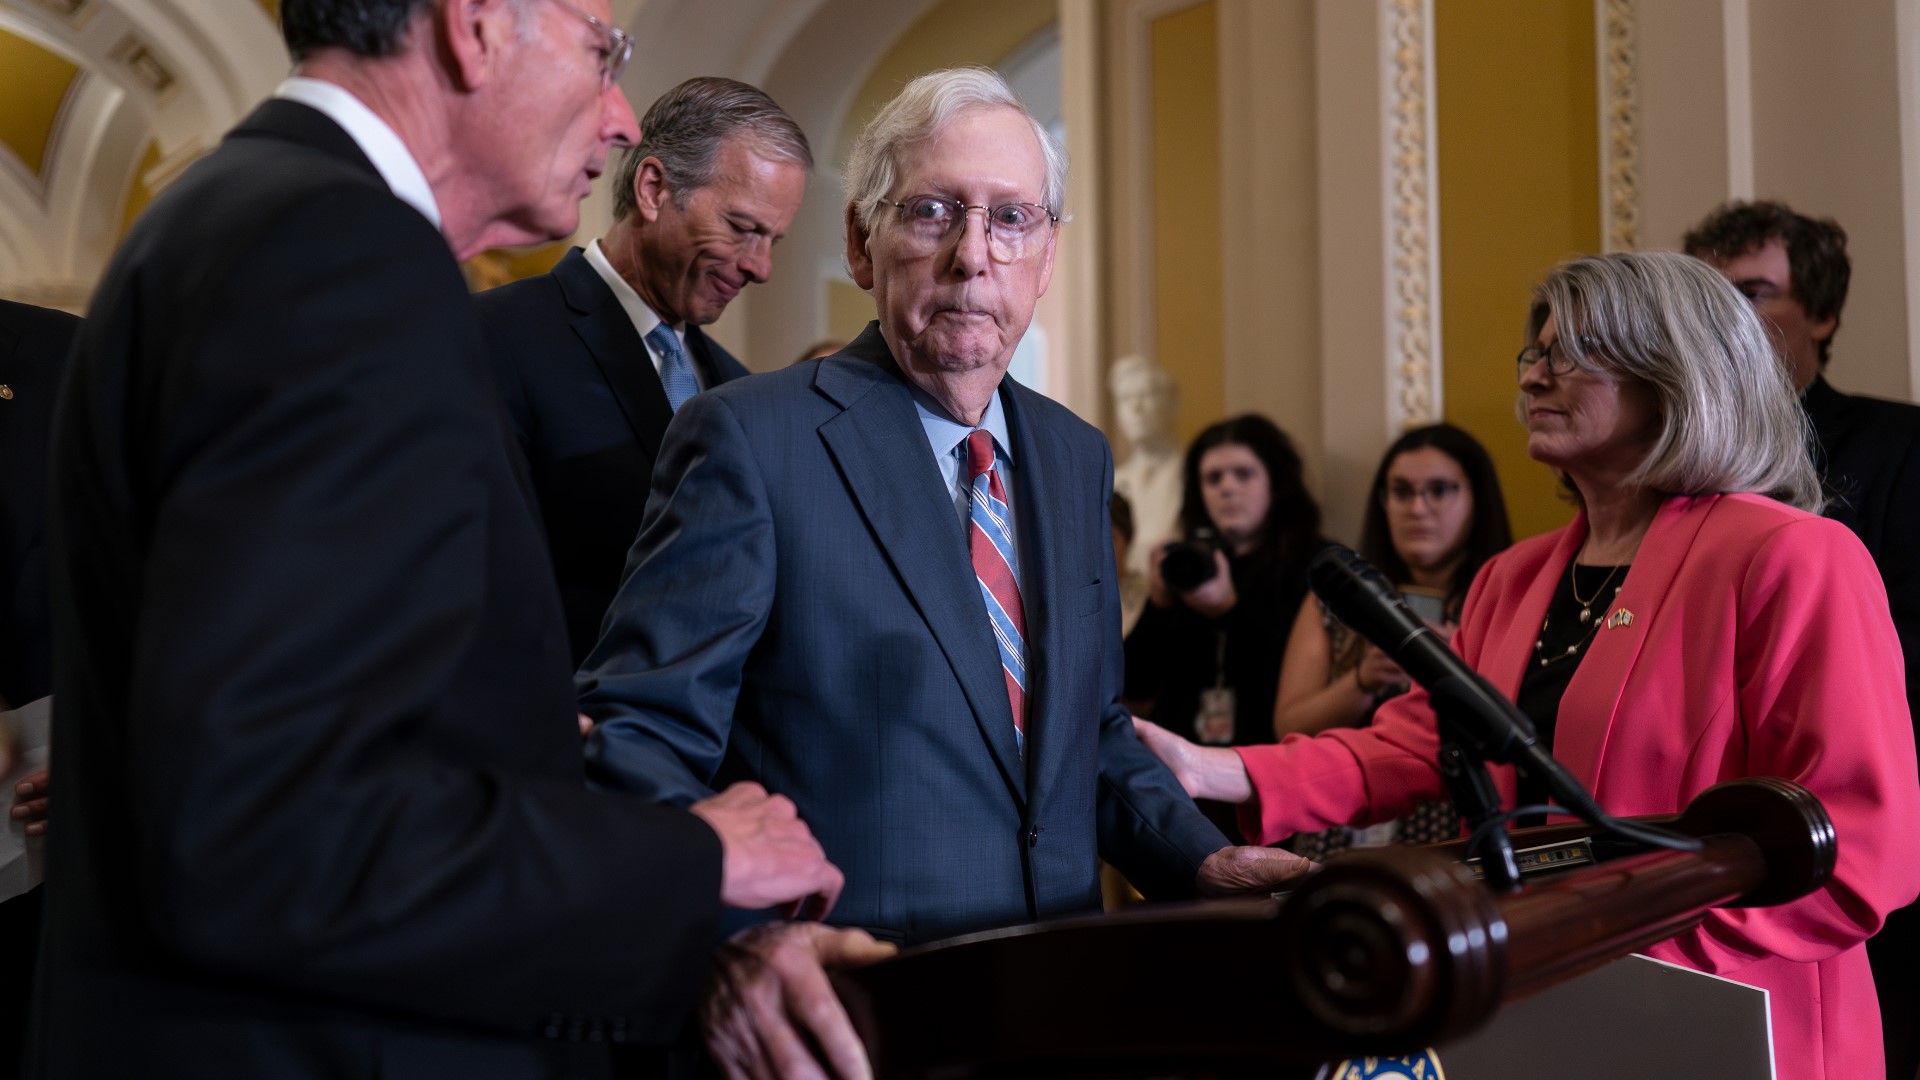 McConnell approached the podium for his weekly press conference and began speaking about the annual defense bill on the floor.